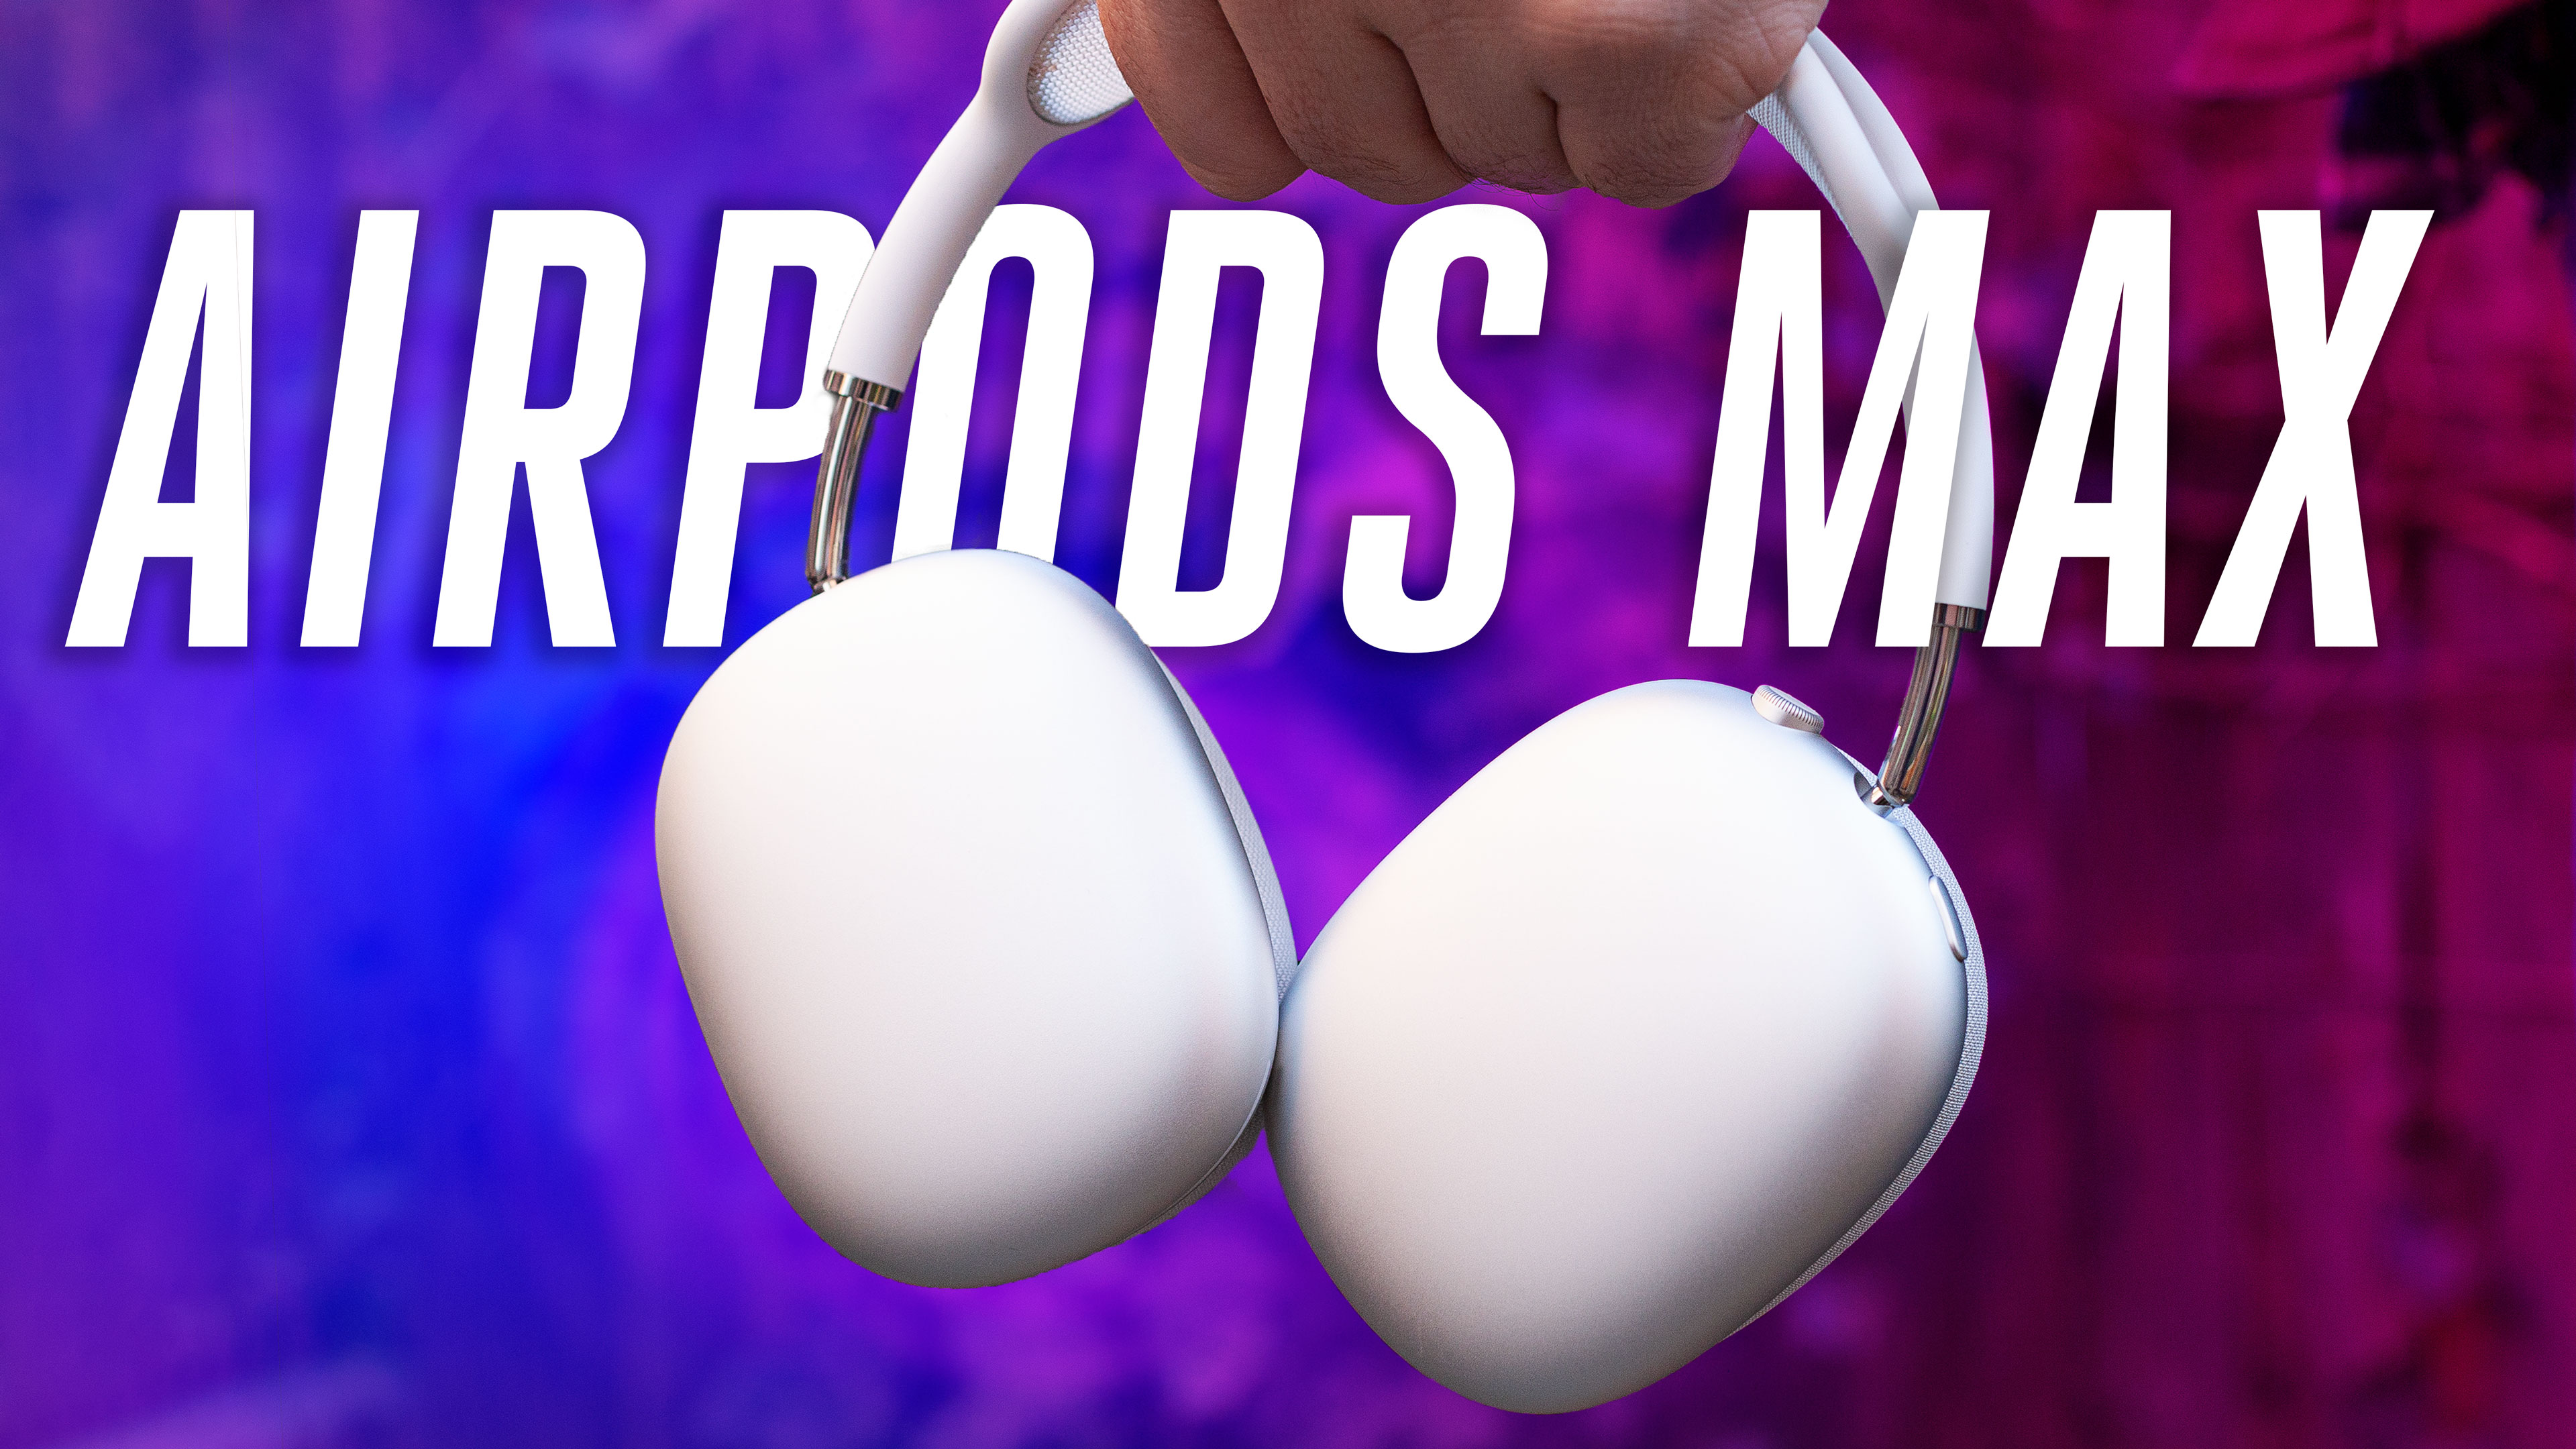 AirPods Max: History, specs, tips, pricing, review, deals, rumors